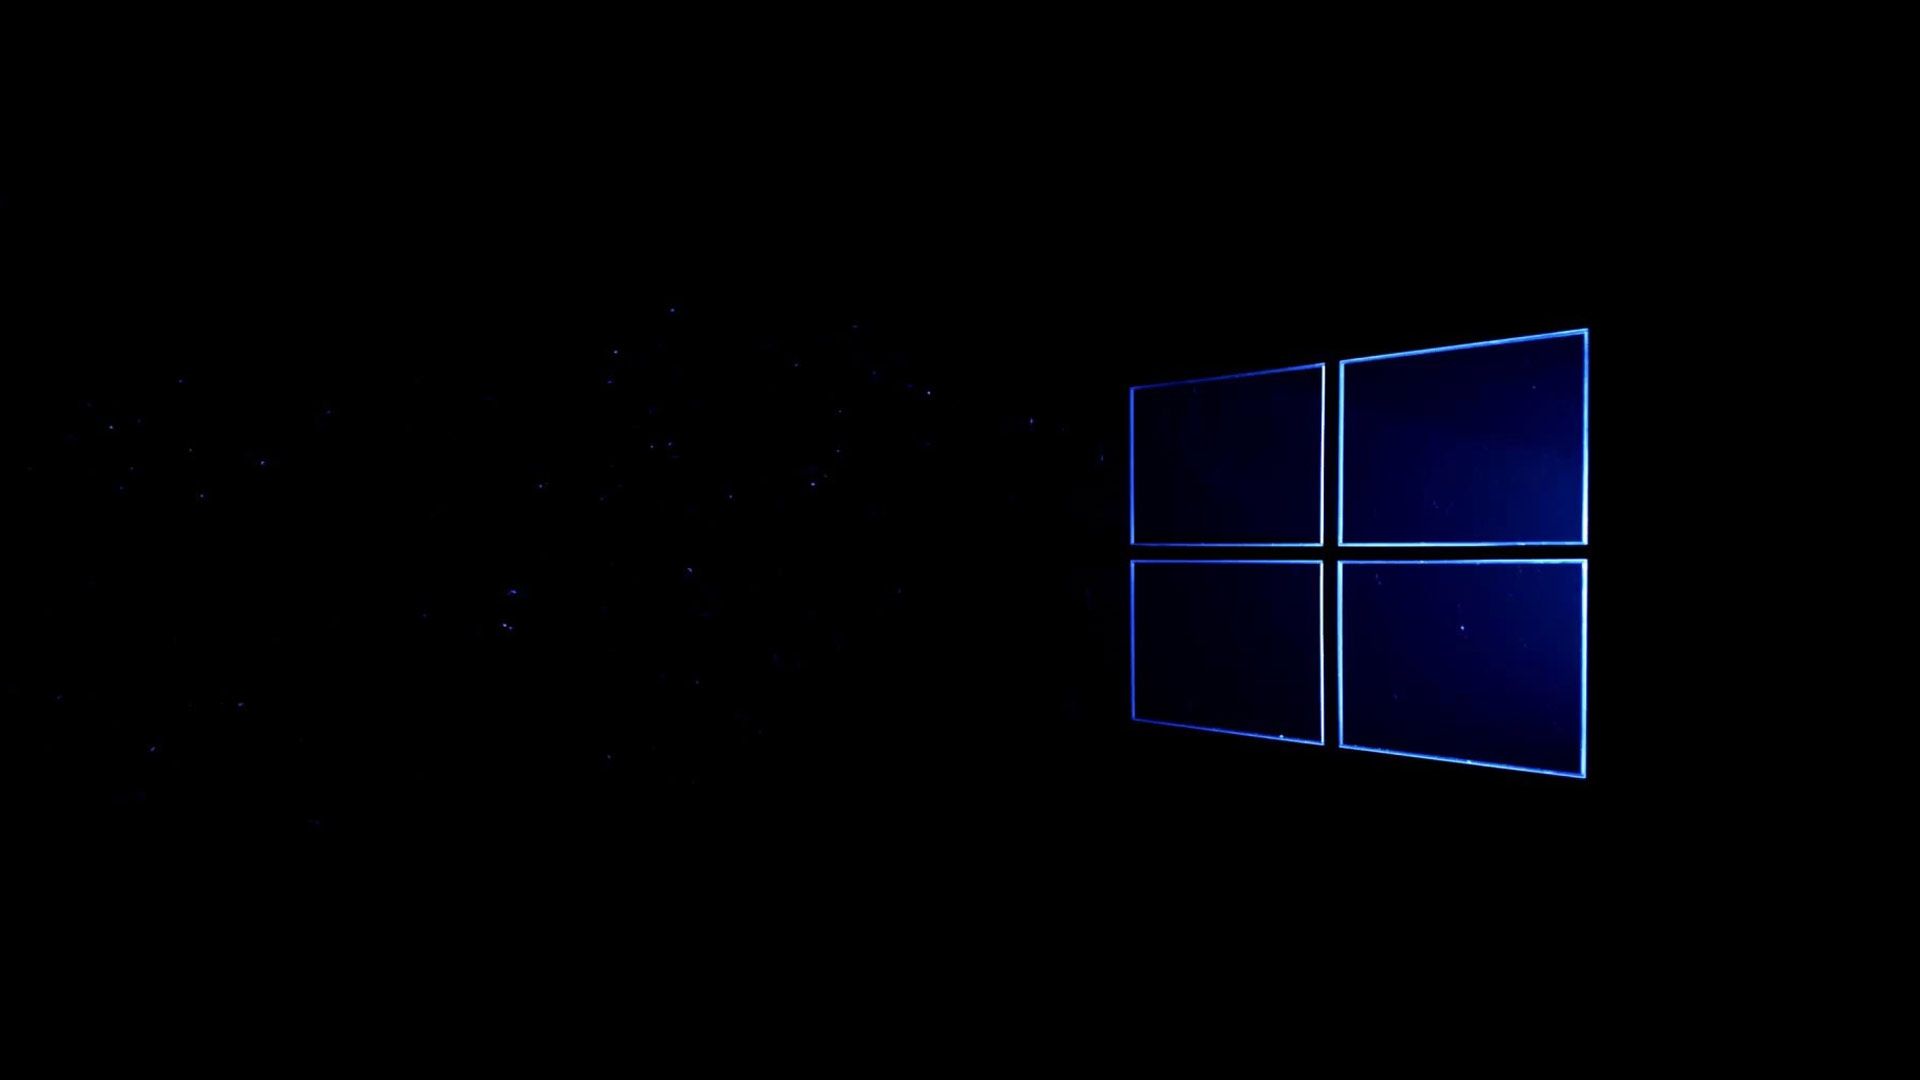 Windows 10 official wallpaper Free full hd wallpapers for 1080p